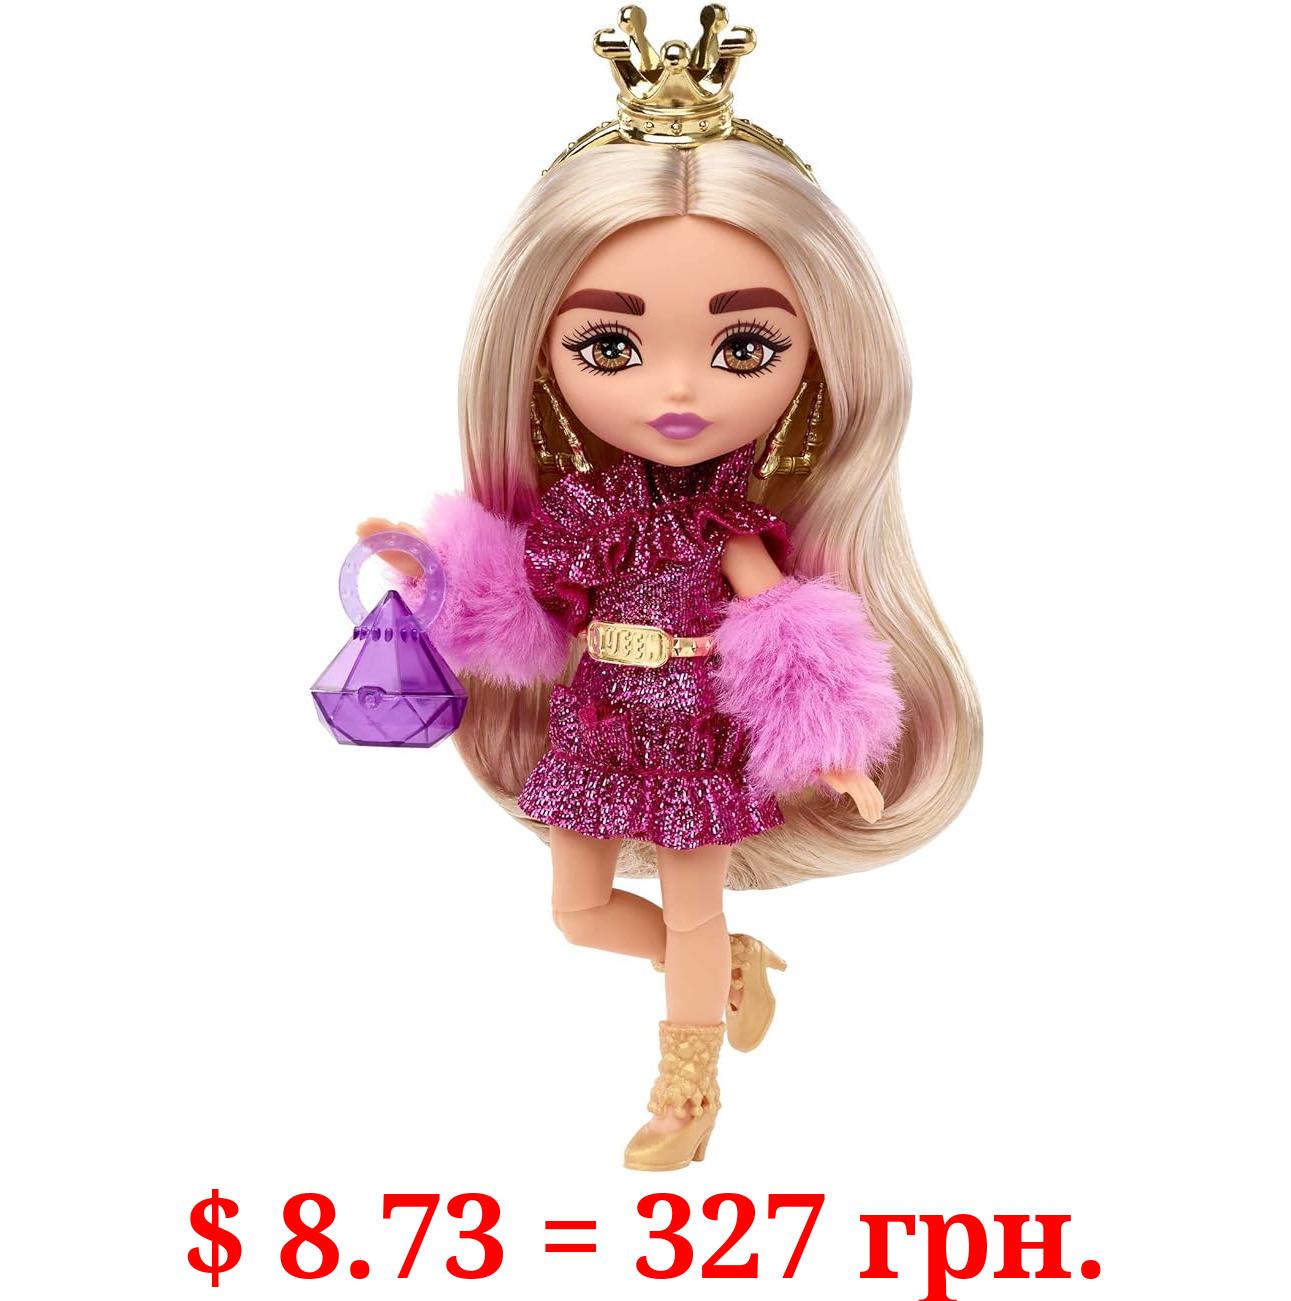 Barbie Extra Minis Doll & Accessories with Blonde Hair, Toy Pieces Include Shimmery Dress & Furry Shrug